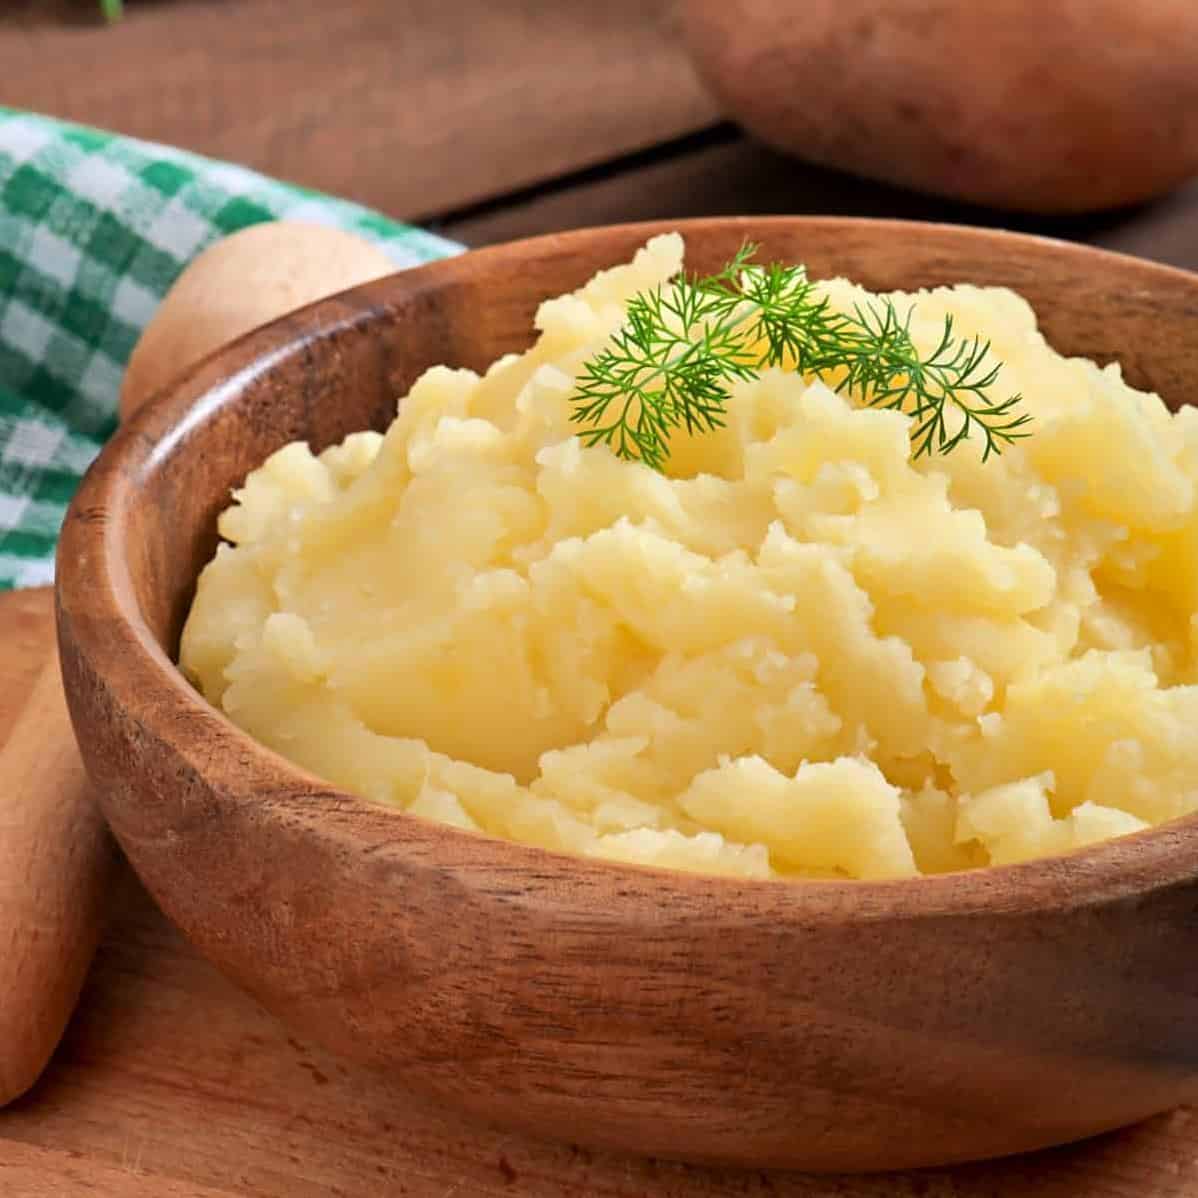  Elevate your mashed potato game with white cheddar.